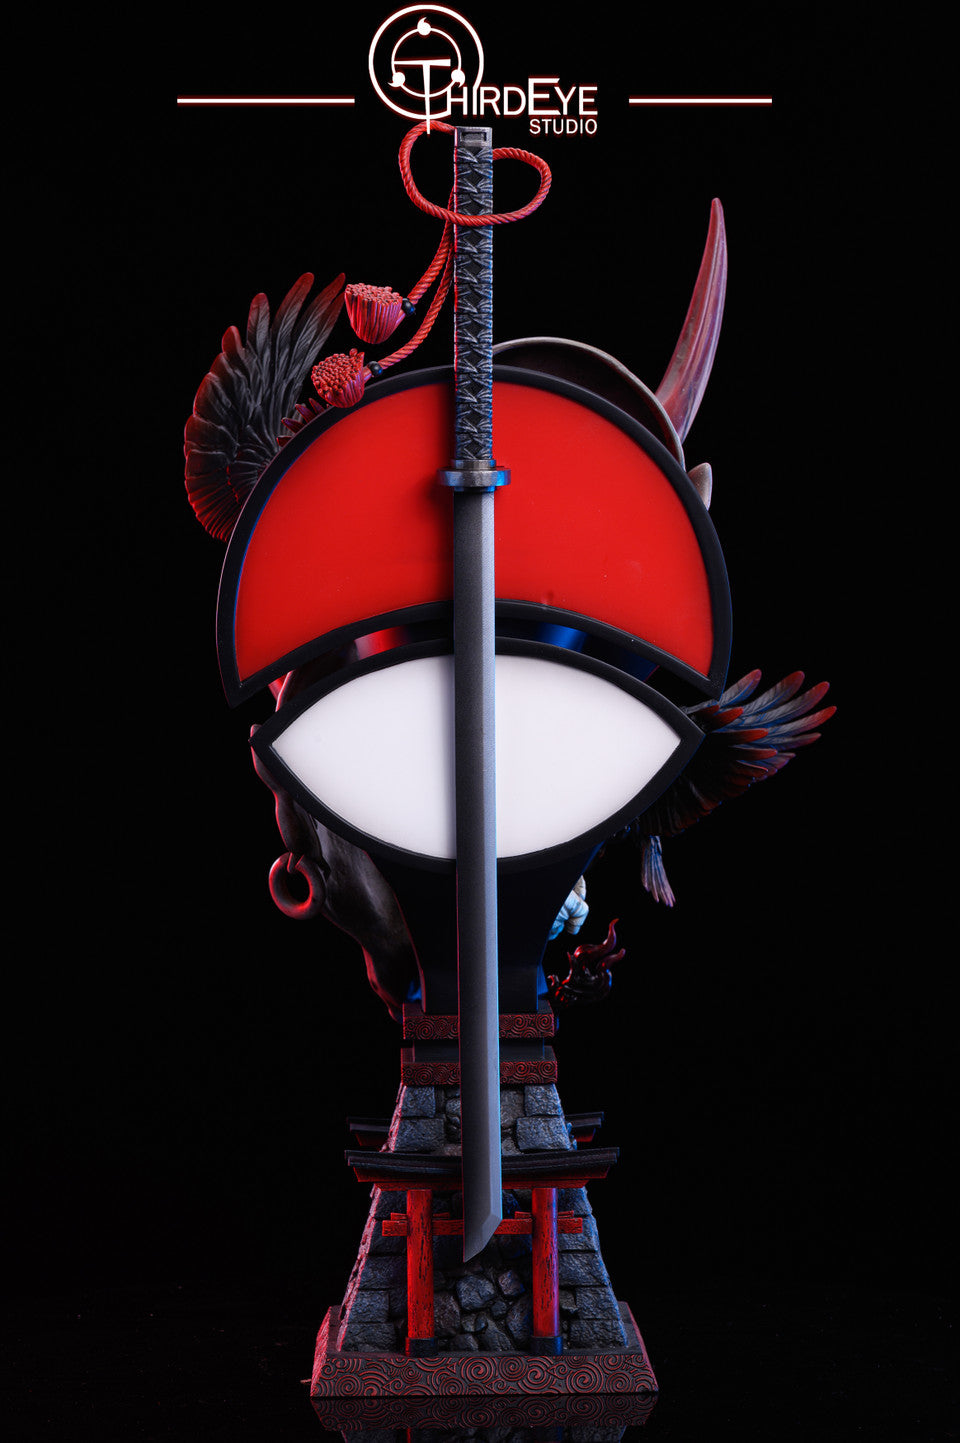 [IN STOCK] Naruto - Third Eye Studio - Itachi Bust 1/3 (Price Does Not Include Shipping - Please Read Description)